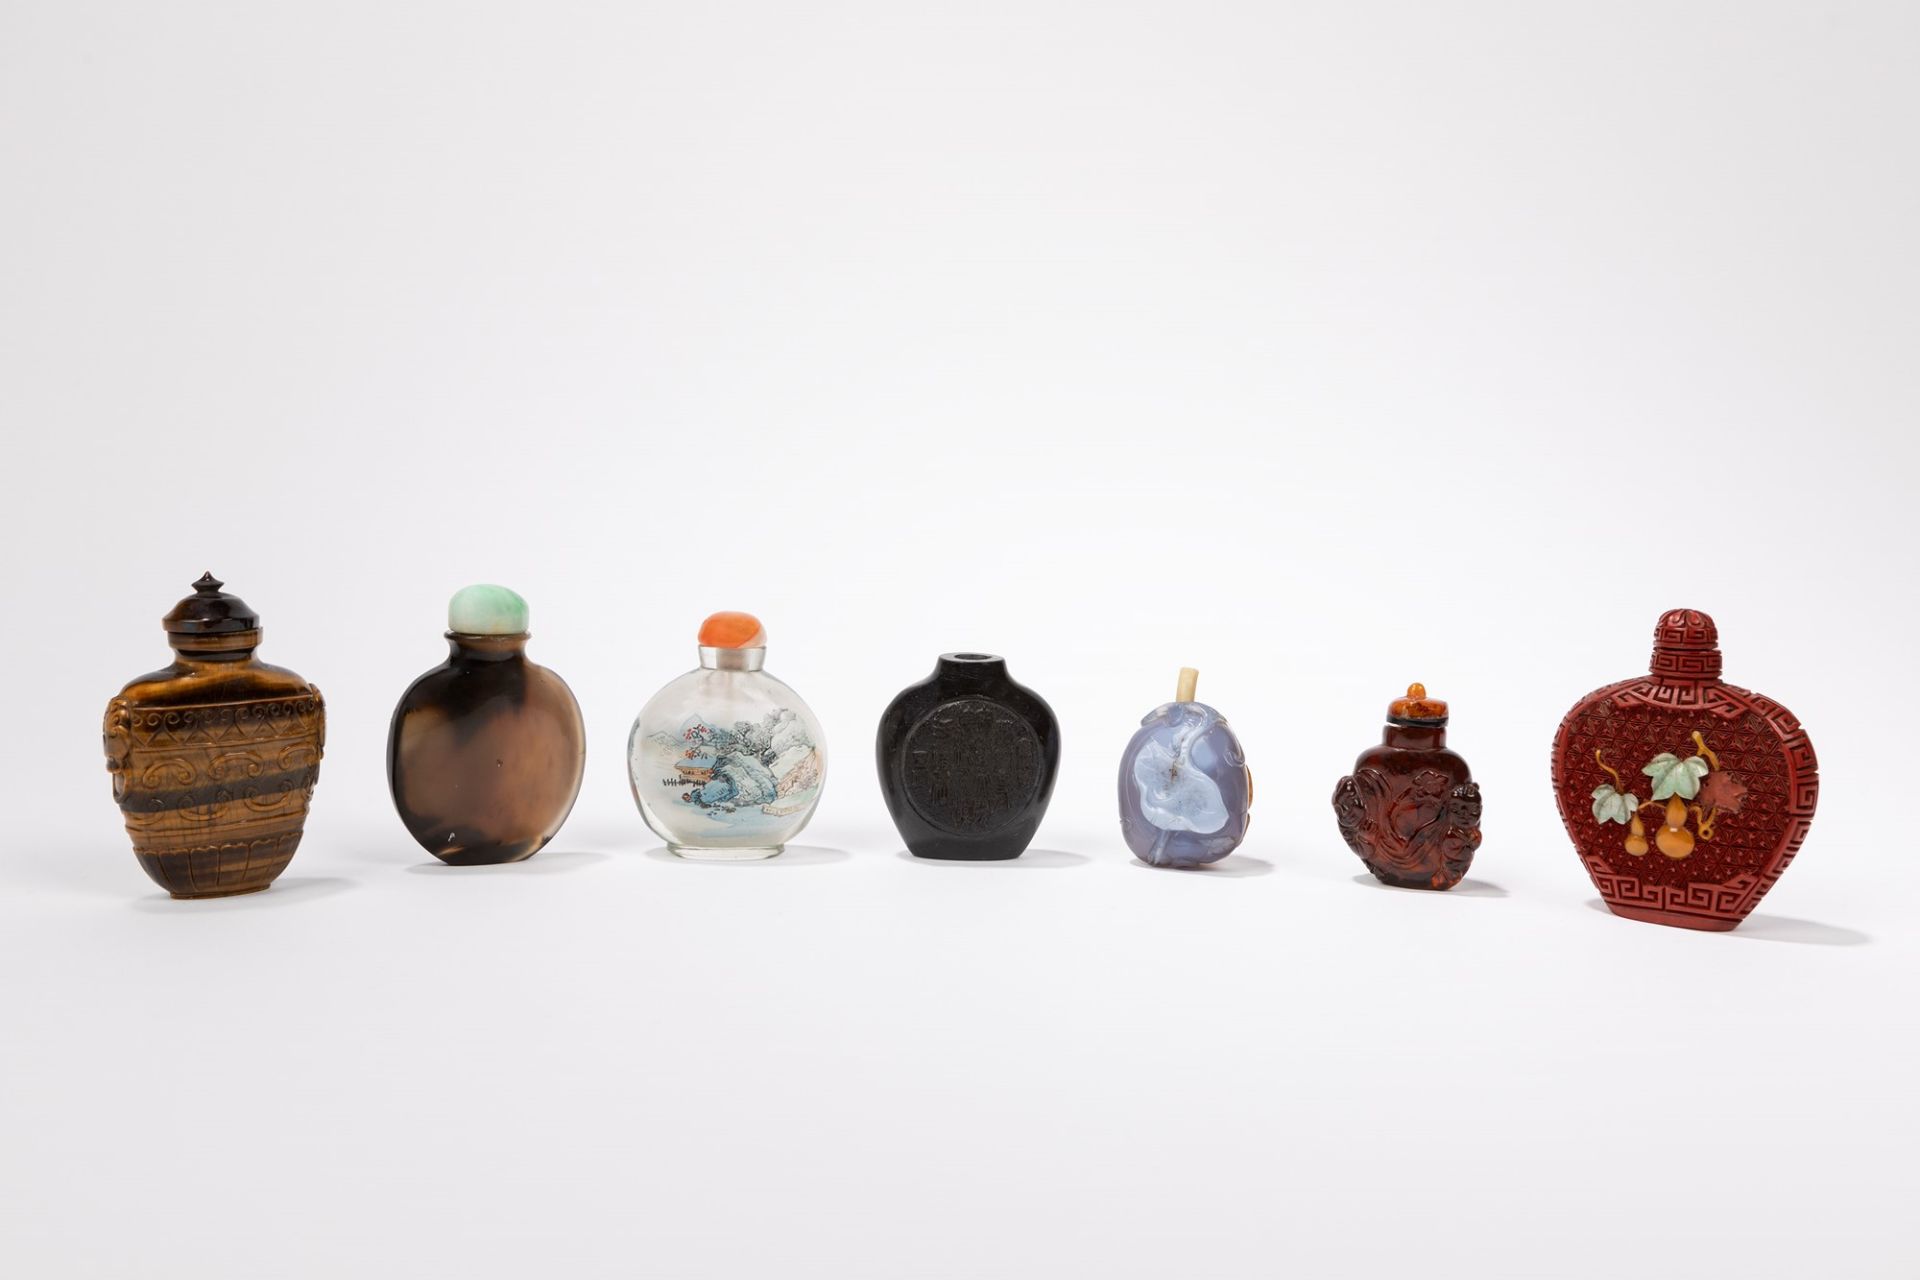 SEVEN SNUFF BOTTLES, China, 19th / 20th century - Image 2 of 2